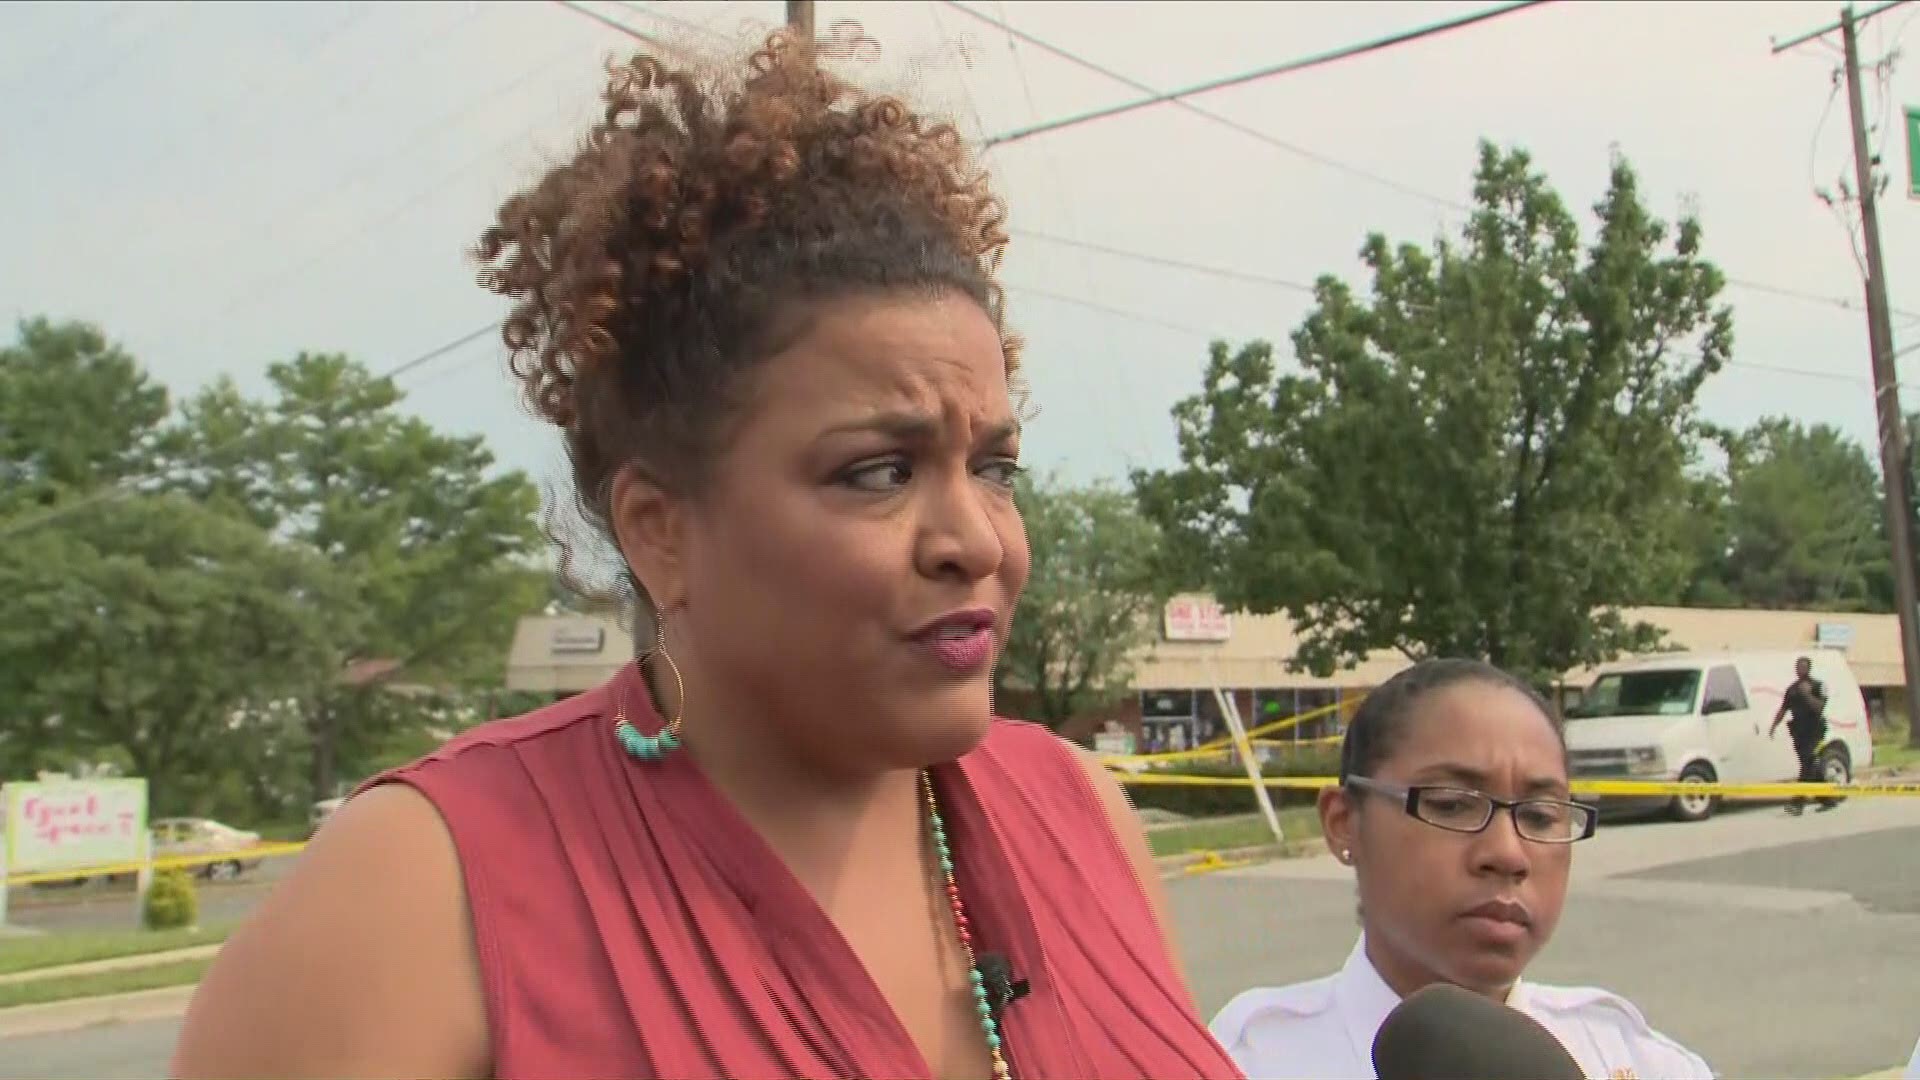 Police explain the shooting happened after a funeral for a DC homicide victim. They said there were at least 100 people involved in a fight outisde the storefront church in Suitland, Md. Jennifer Donelan, from Prince George's County PD gives a press update.  on.wusa9.com/2YDT3He